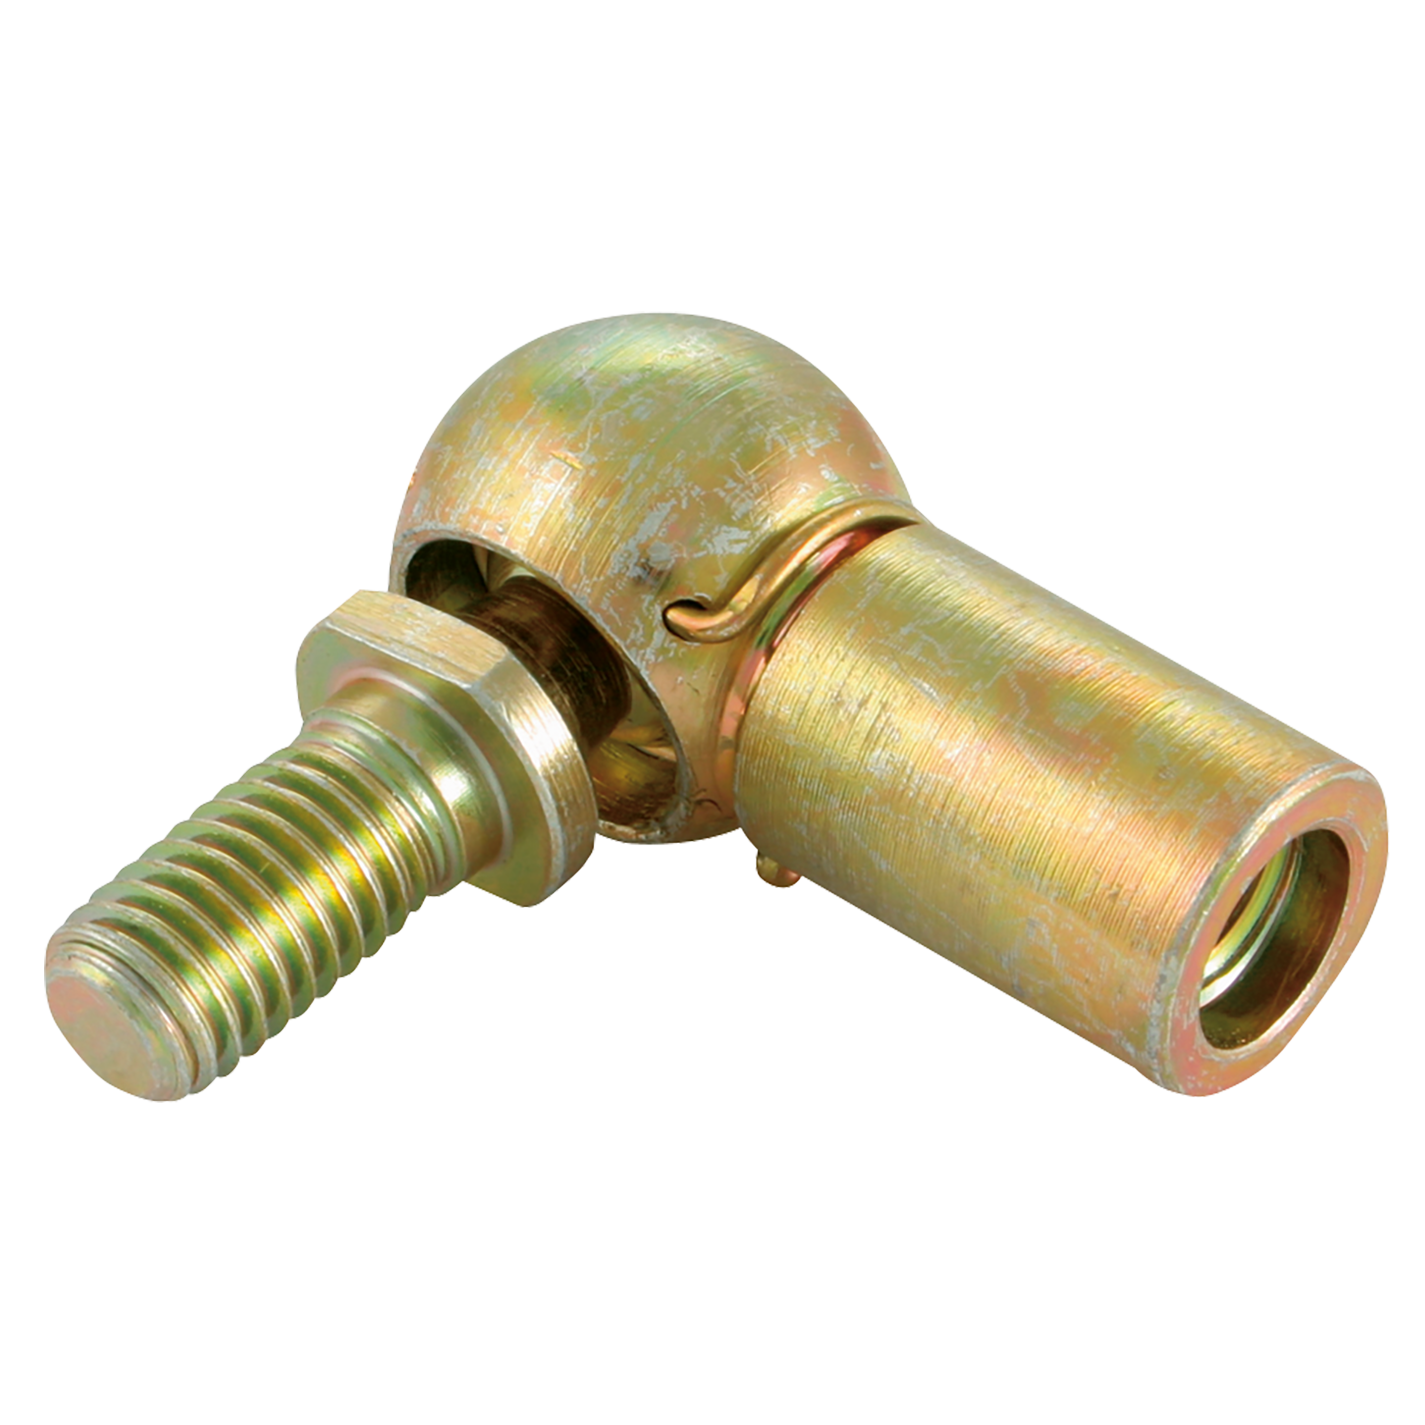 M/STEEL BALL JOINT M8 MALE X M6 FEMALE